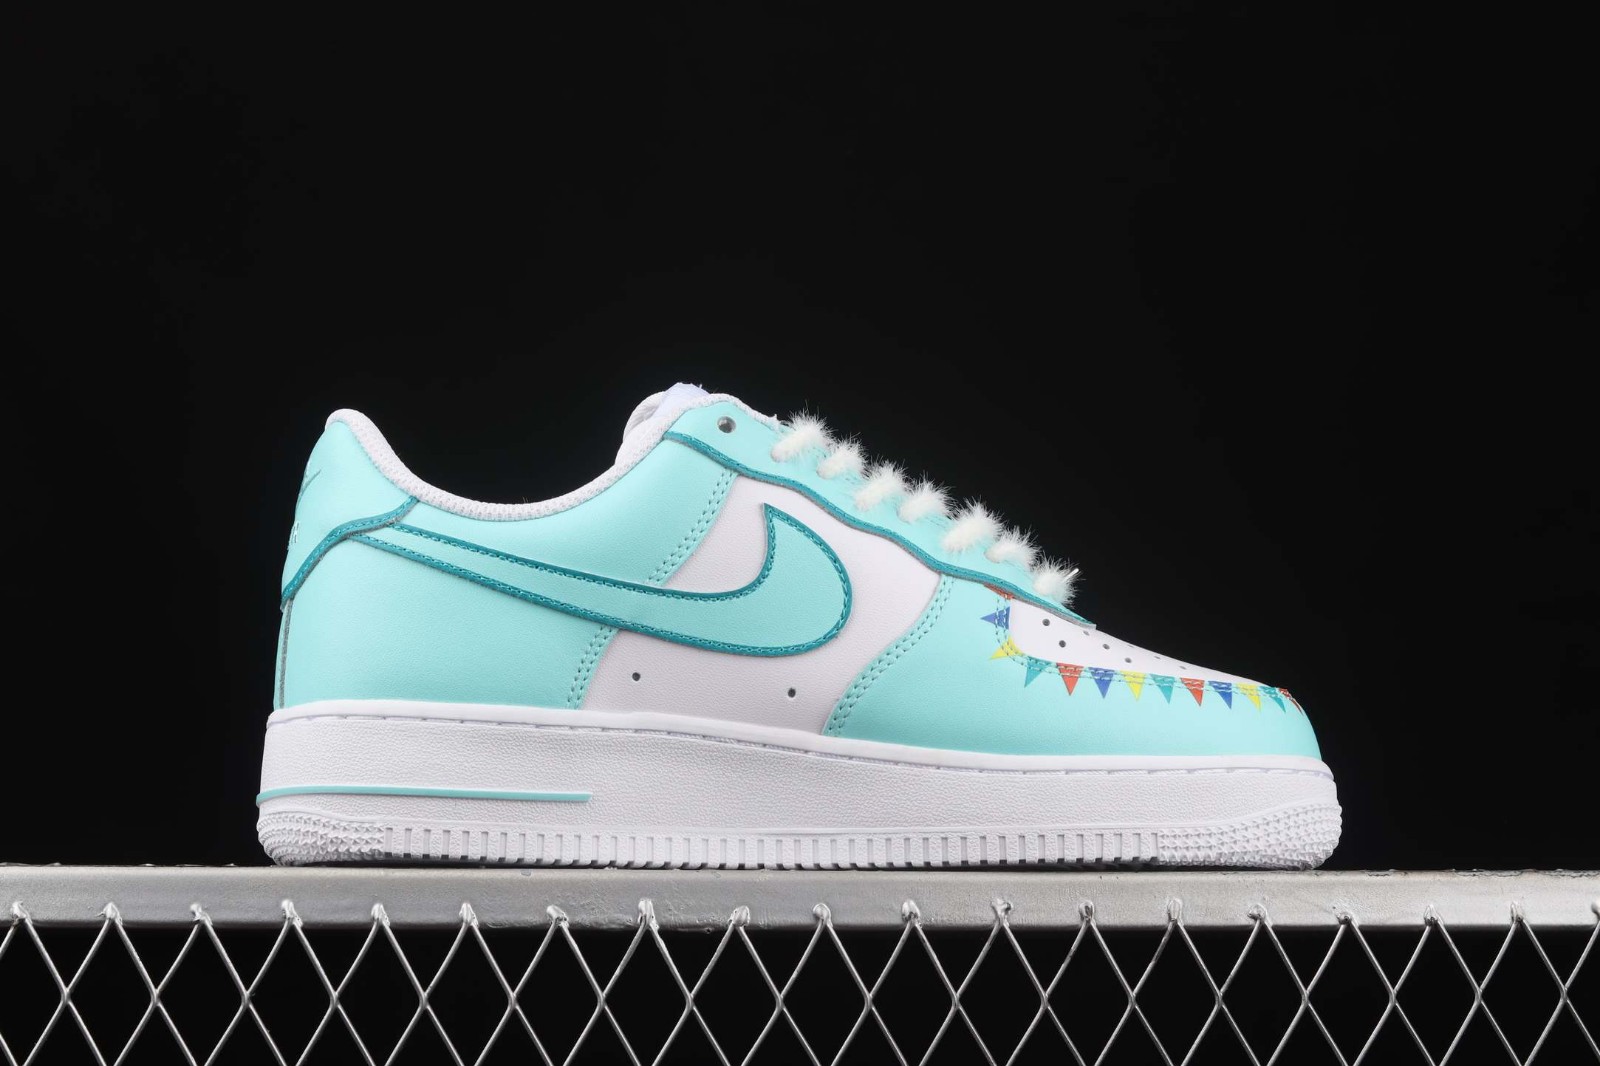 Mint Green Custom Air Force 1 Low/Mid/High Sneakers High / 7 Y / 8.5 W